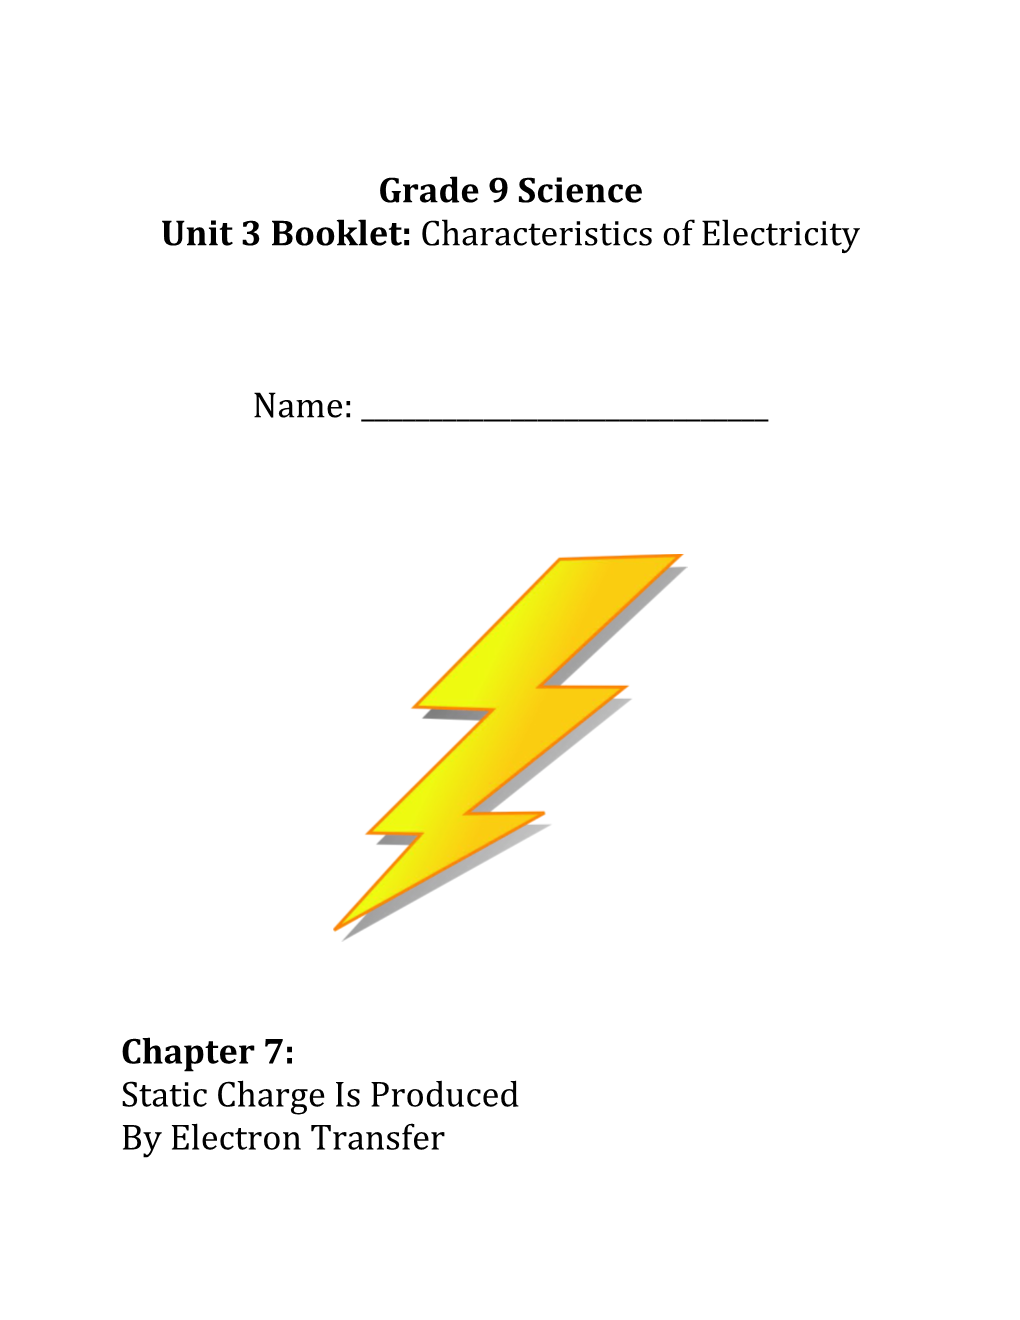 Unit 3 Booklet: Characteristics of Electricity